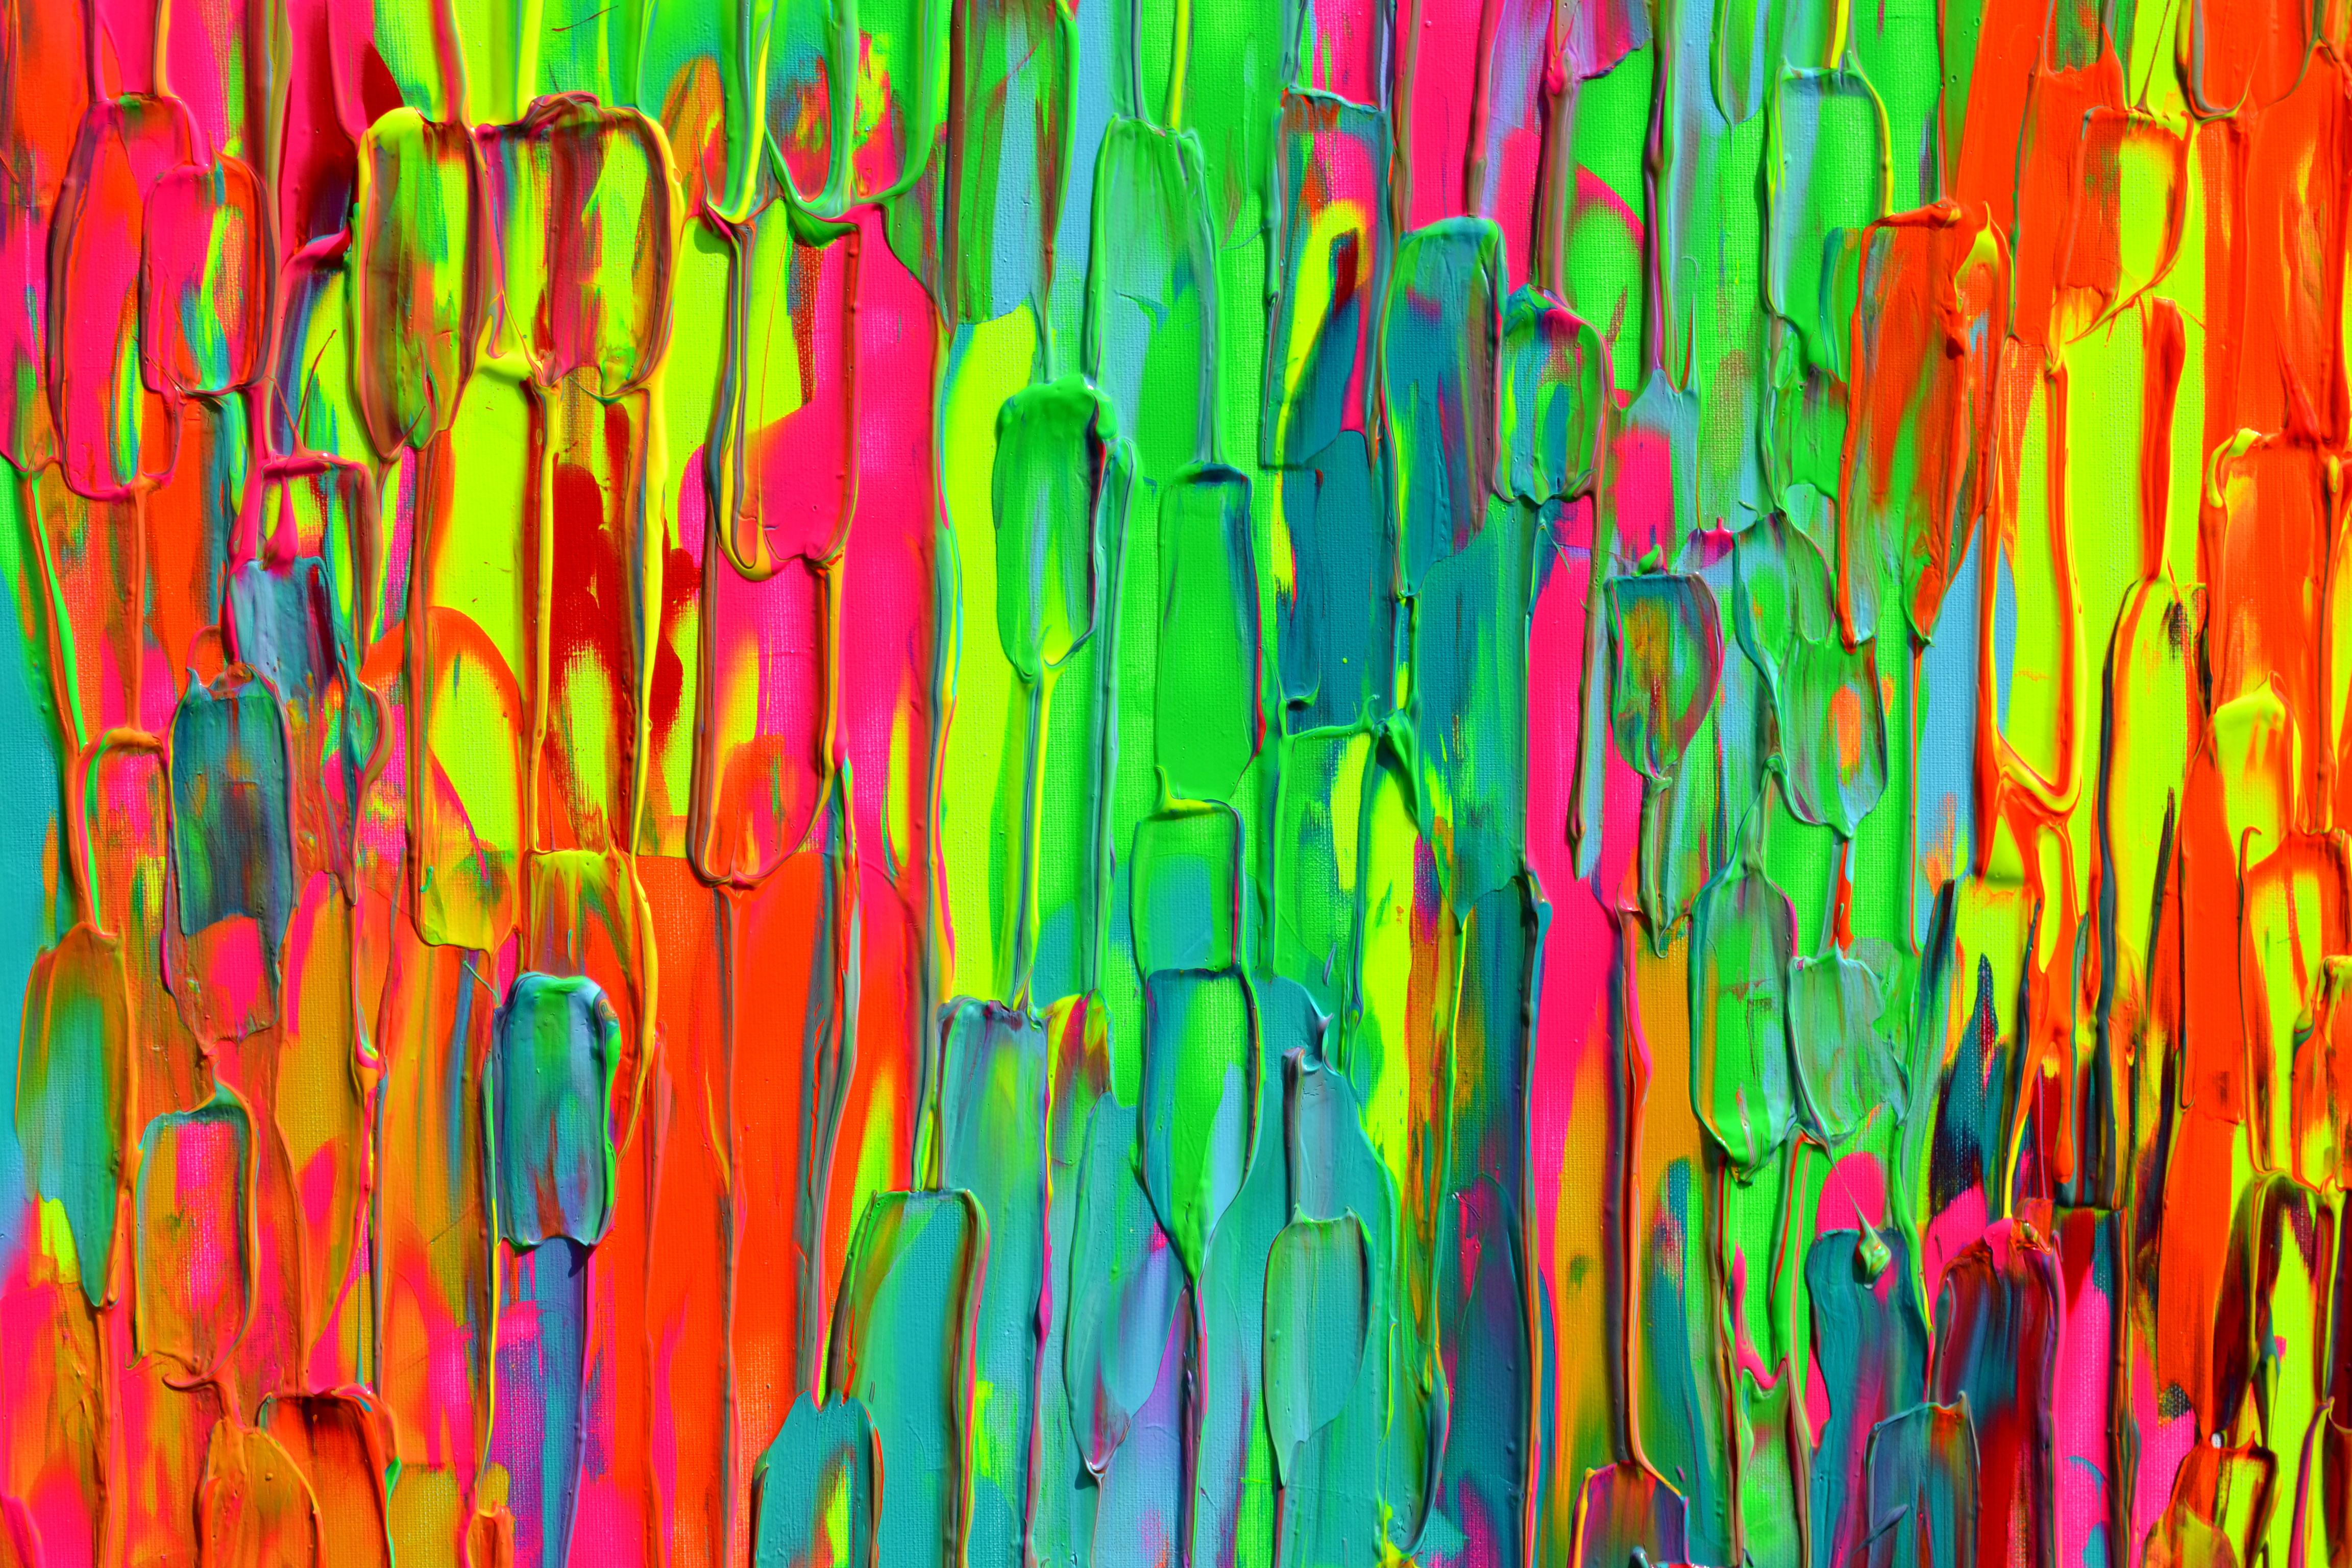 A very beautiful large colorful abstract painting with many neon nuances, heavy relief textured with palette knife, vibrant and emotional.
READY TO HANG - GALLERY QUALITY
It's all about colors happiness and freedom!
Dimensions: 140x80X4 cm -